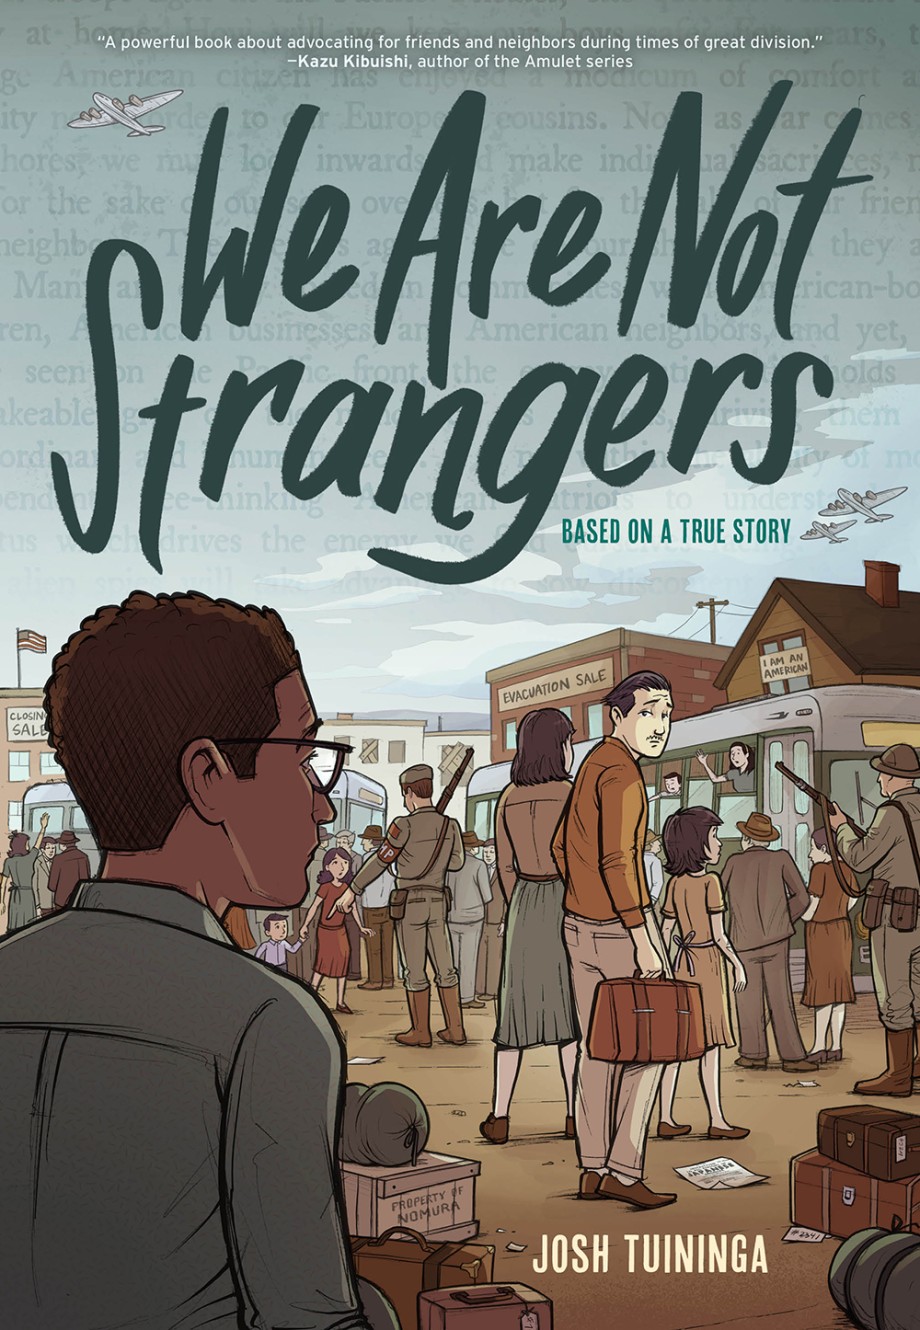 We Are Not Strangers (Hardcover)